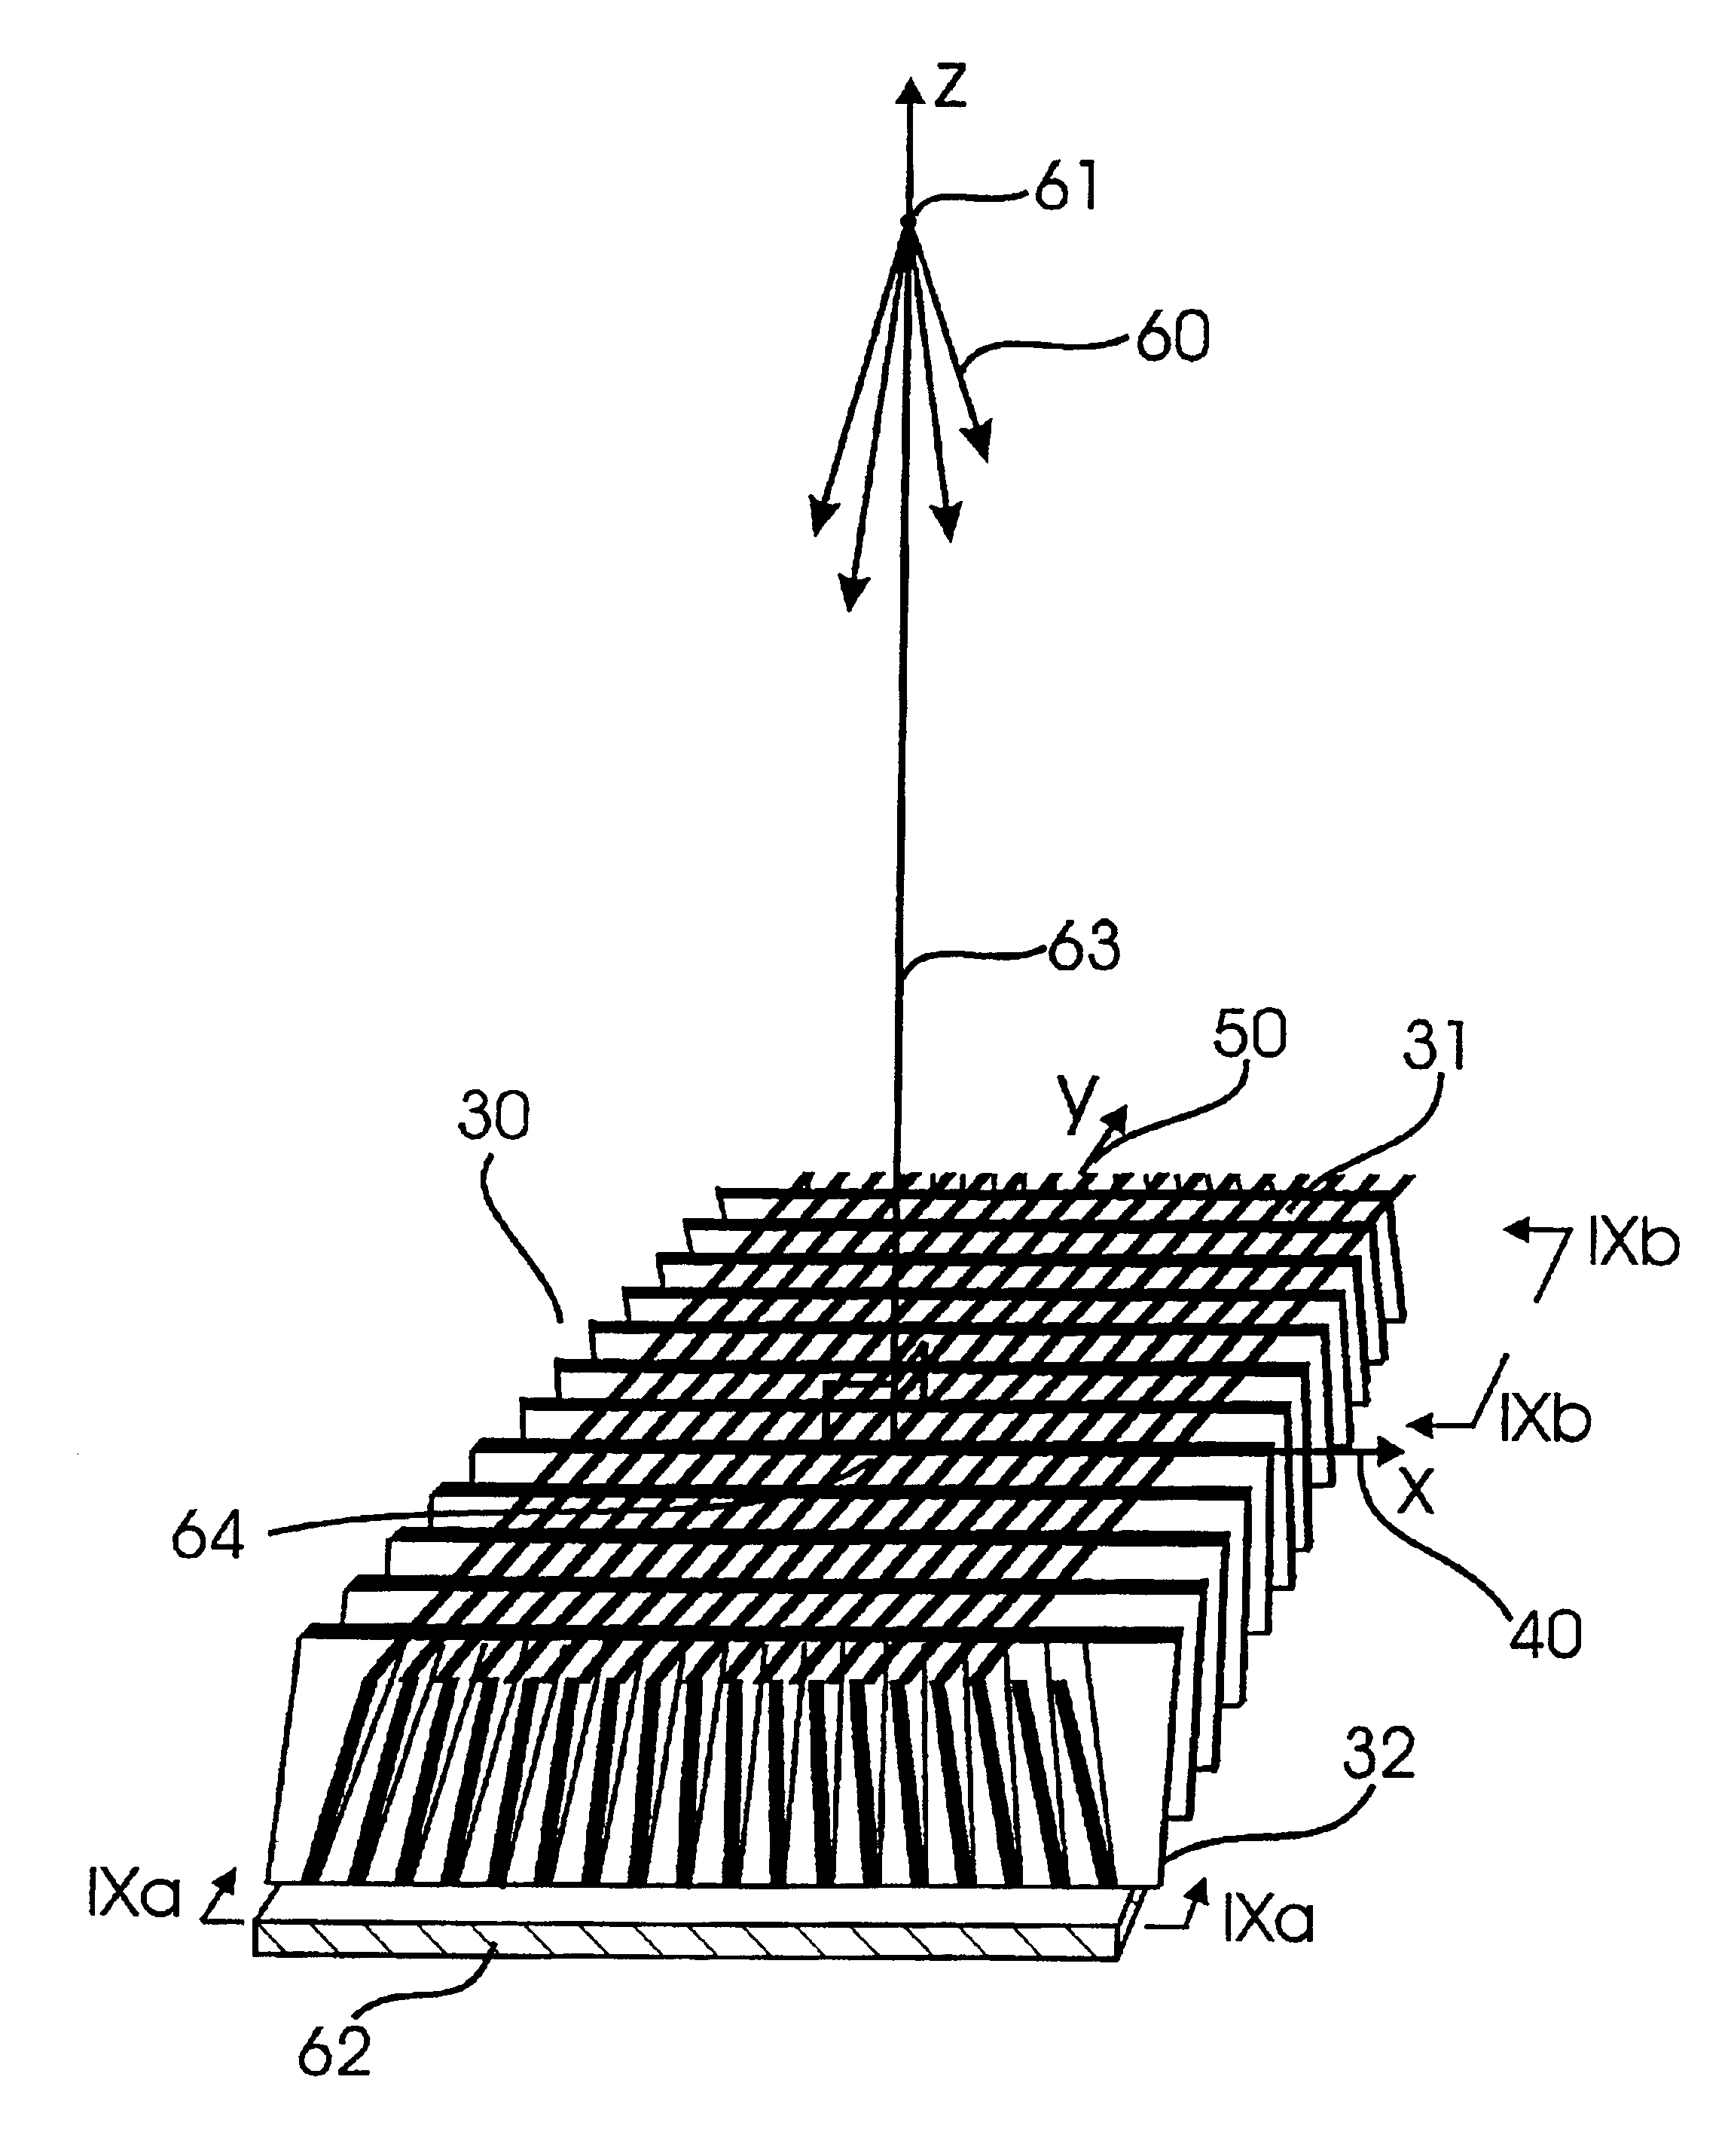 Anti-scatter grids and collimator designs, and their motion, fabrication and assembly